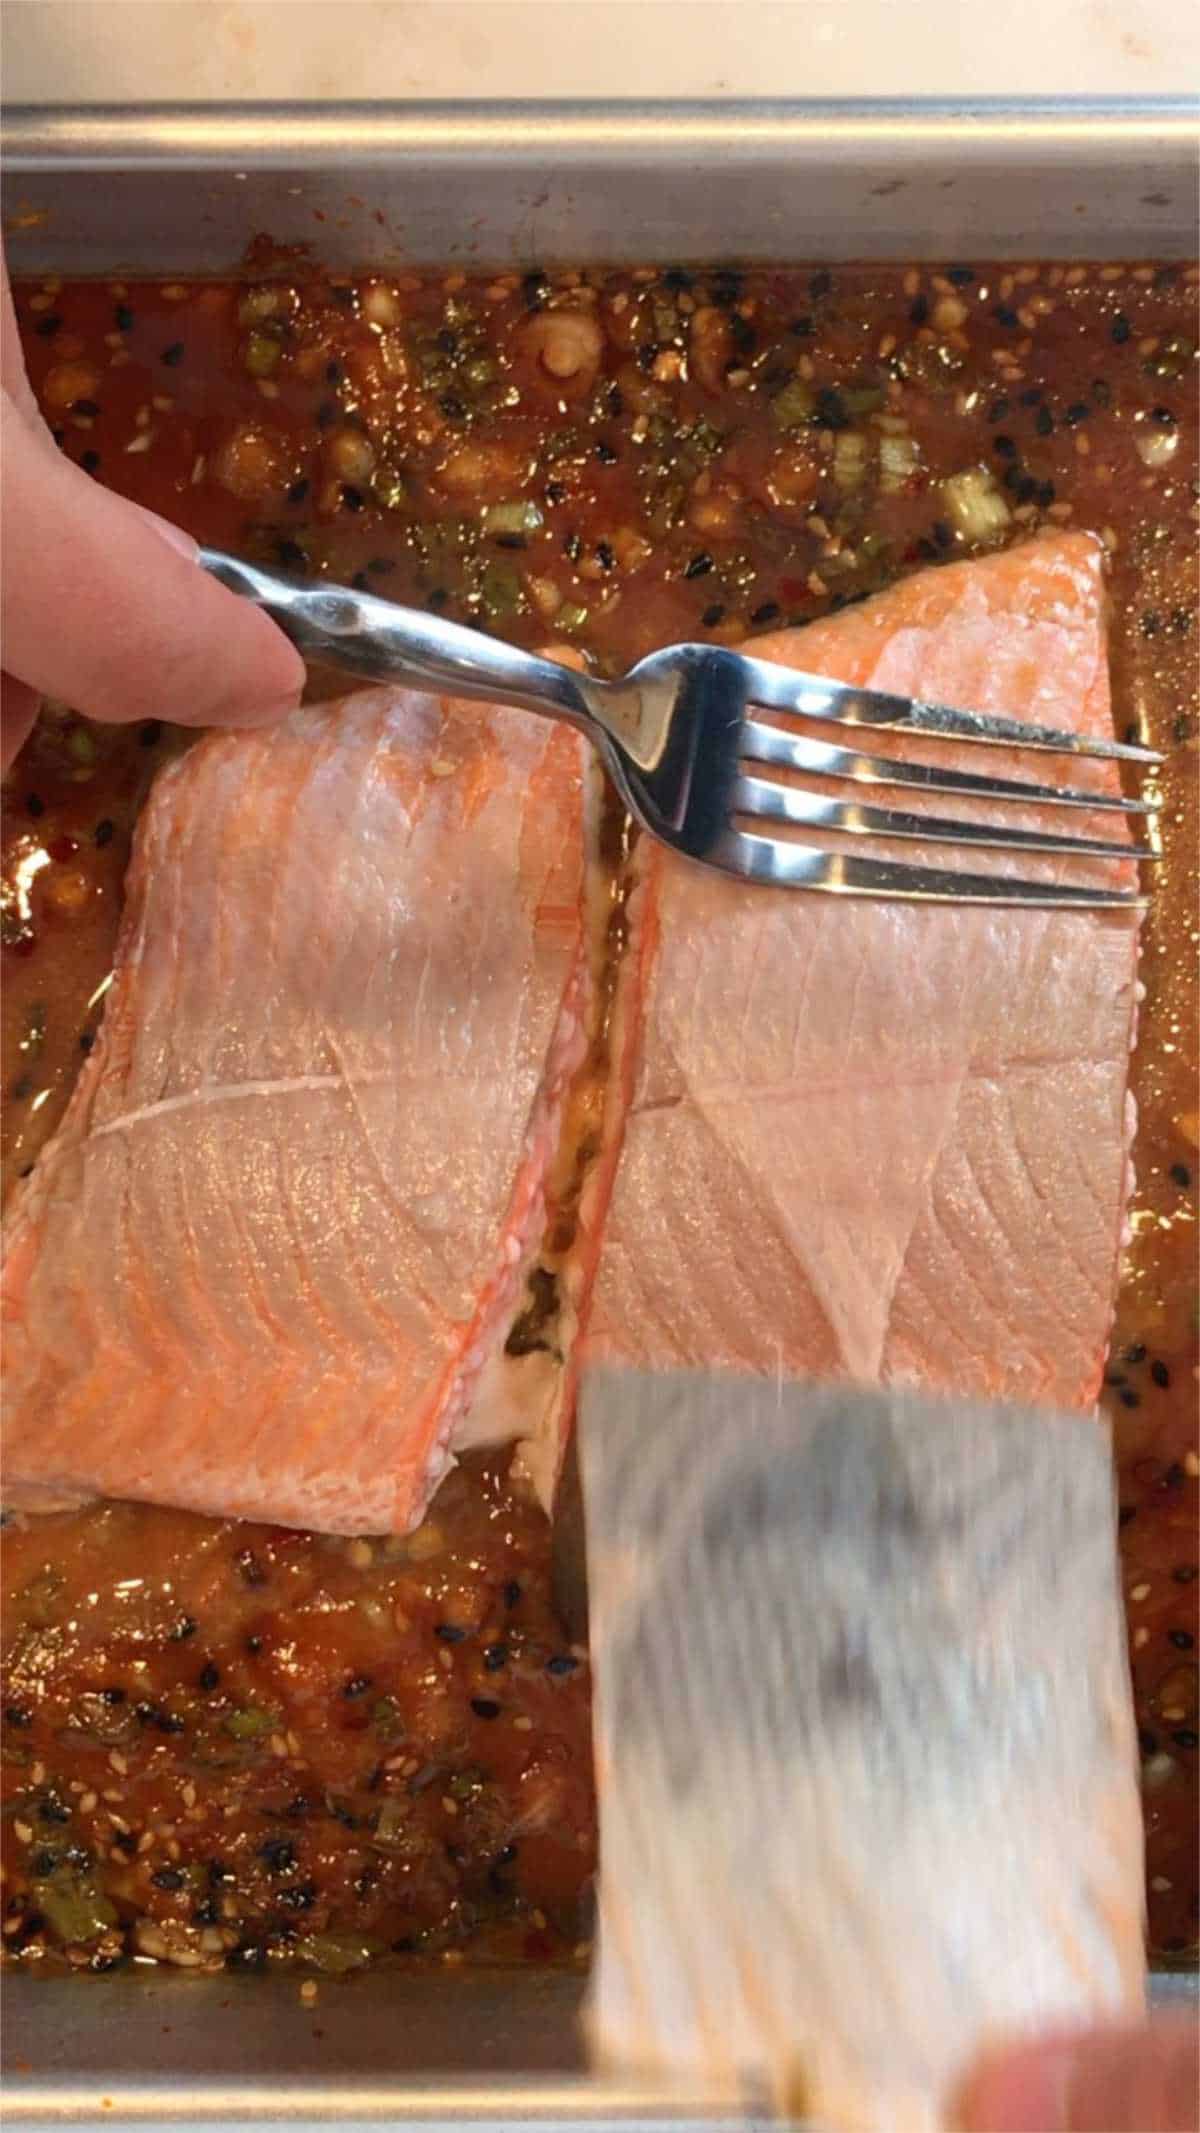 Hand using a fork to peel the skin off a salmon filet.